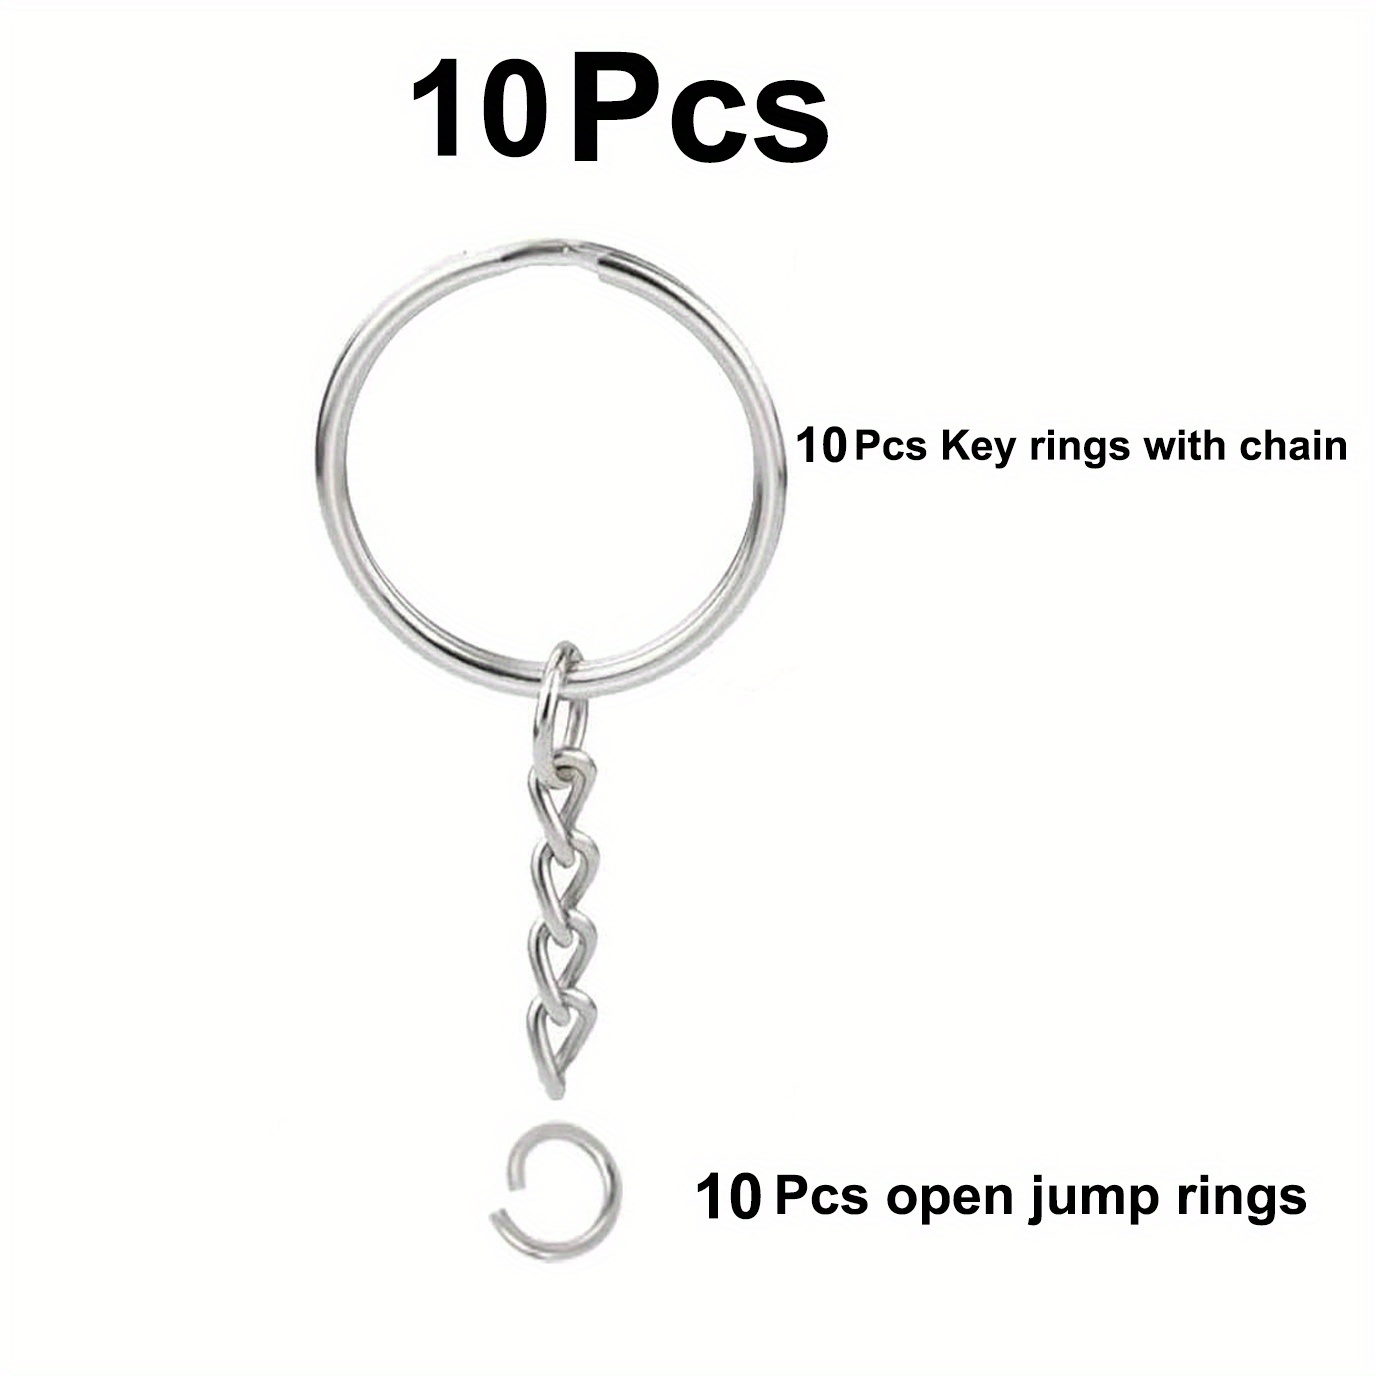  Stainless Steel Key Rings - 10 Pcs ~1inch, 25mm Round